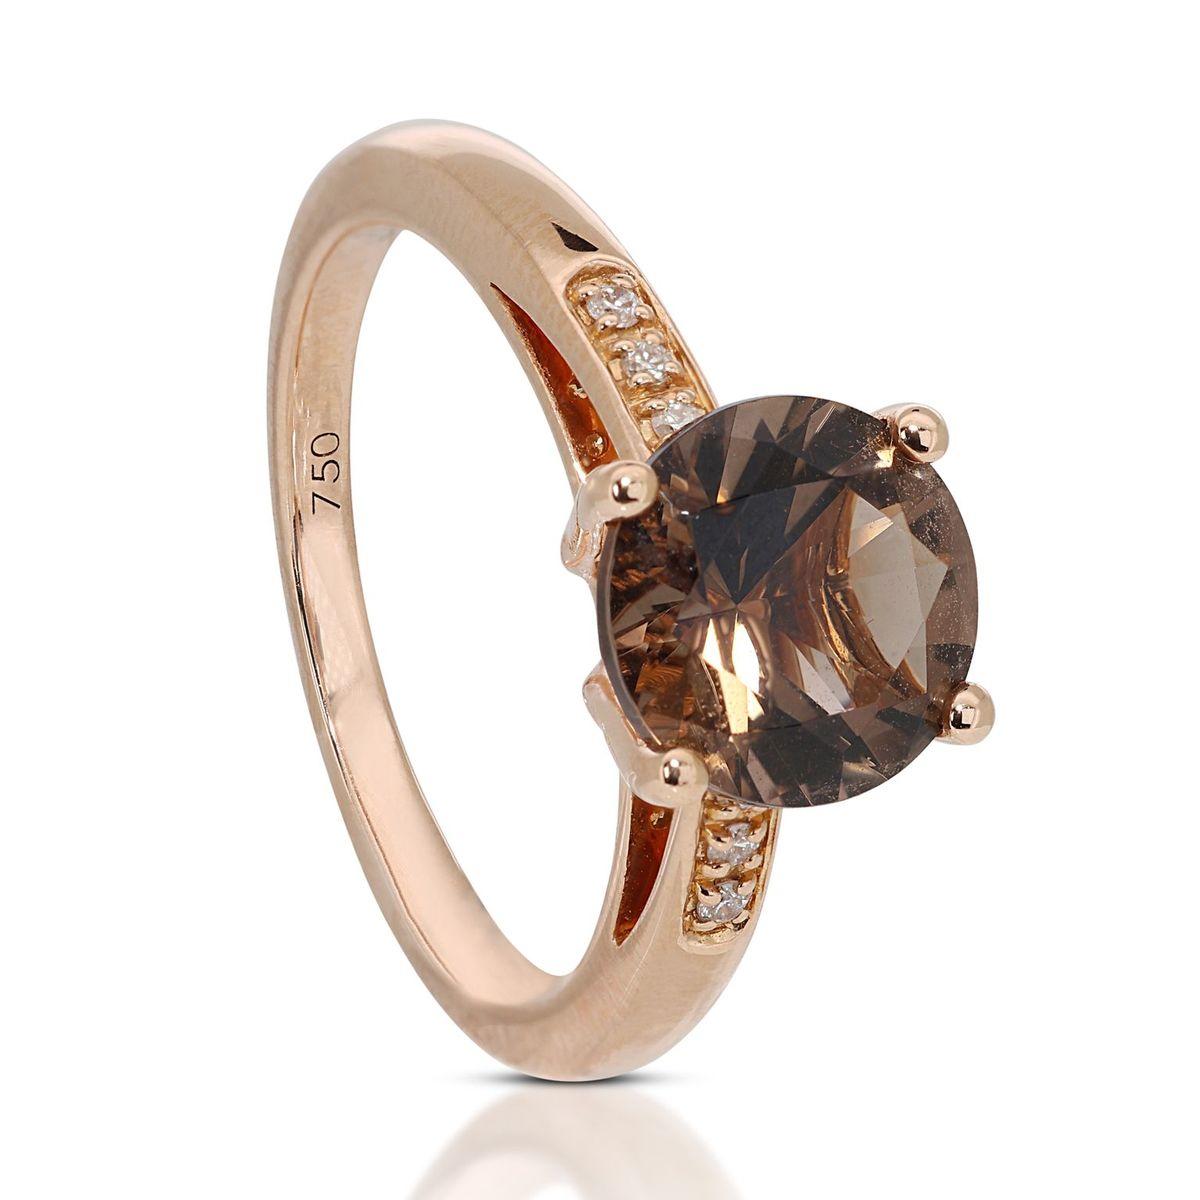 Gorgeous 18k Rose Gold Pave Ring with 1.83 Carat Natural Quartz and Diamonds 2